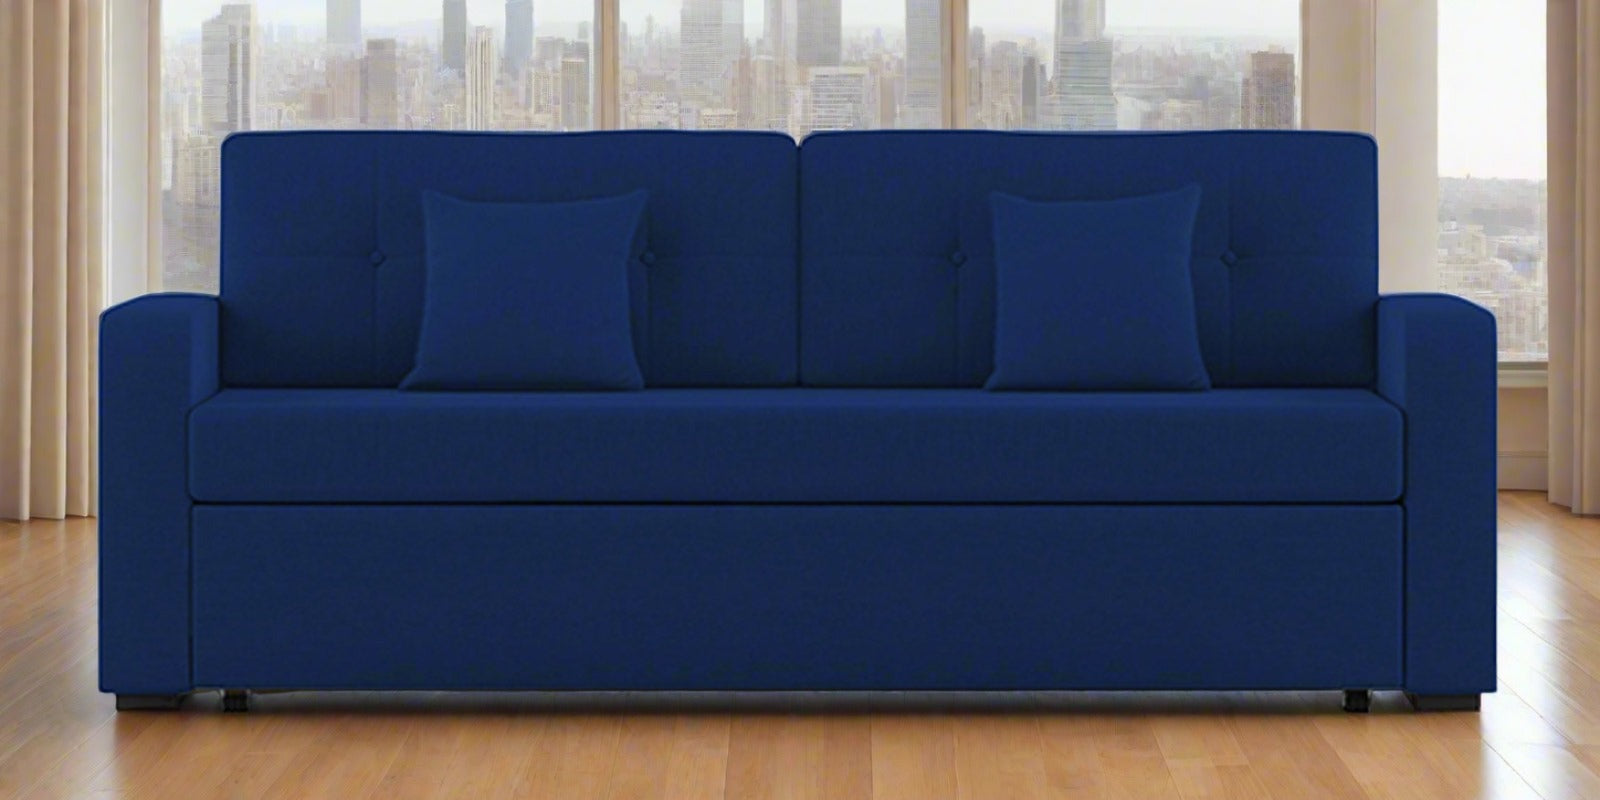 Rocky Fabric 3 Seater Pull Out Sofa Cum Bed In Royal Blue Colour With Storage